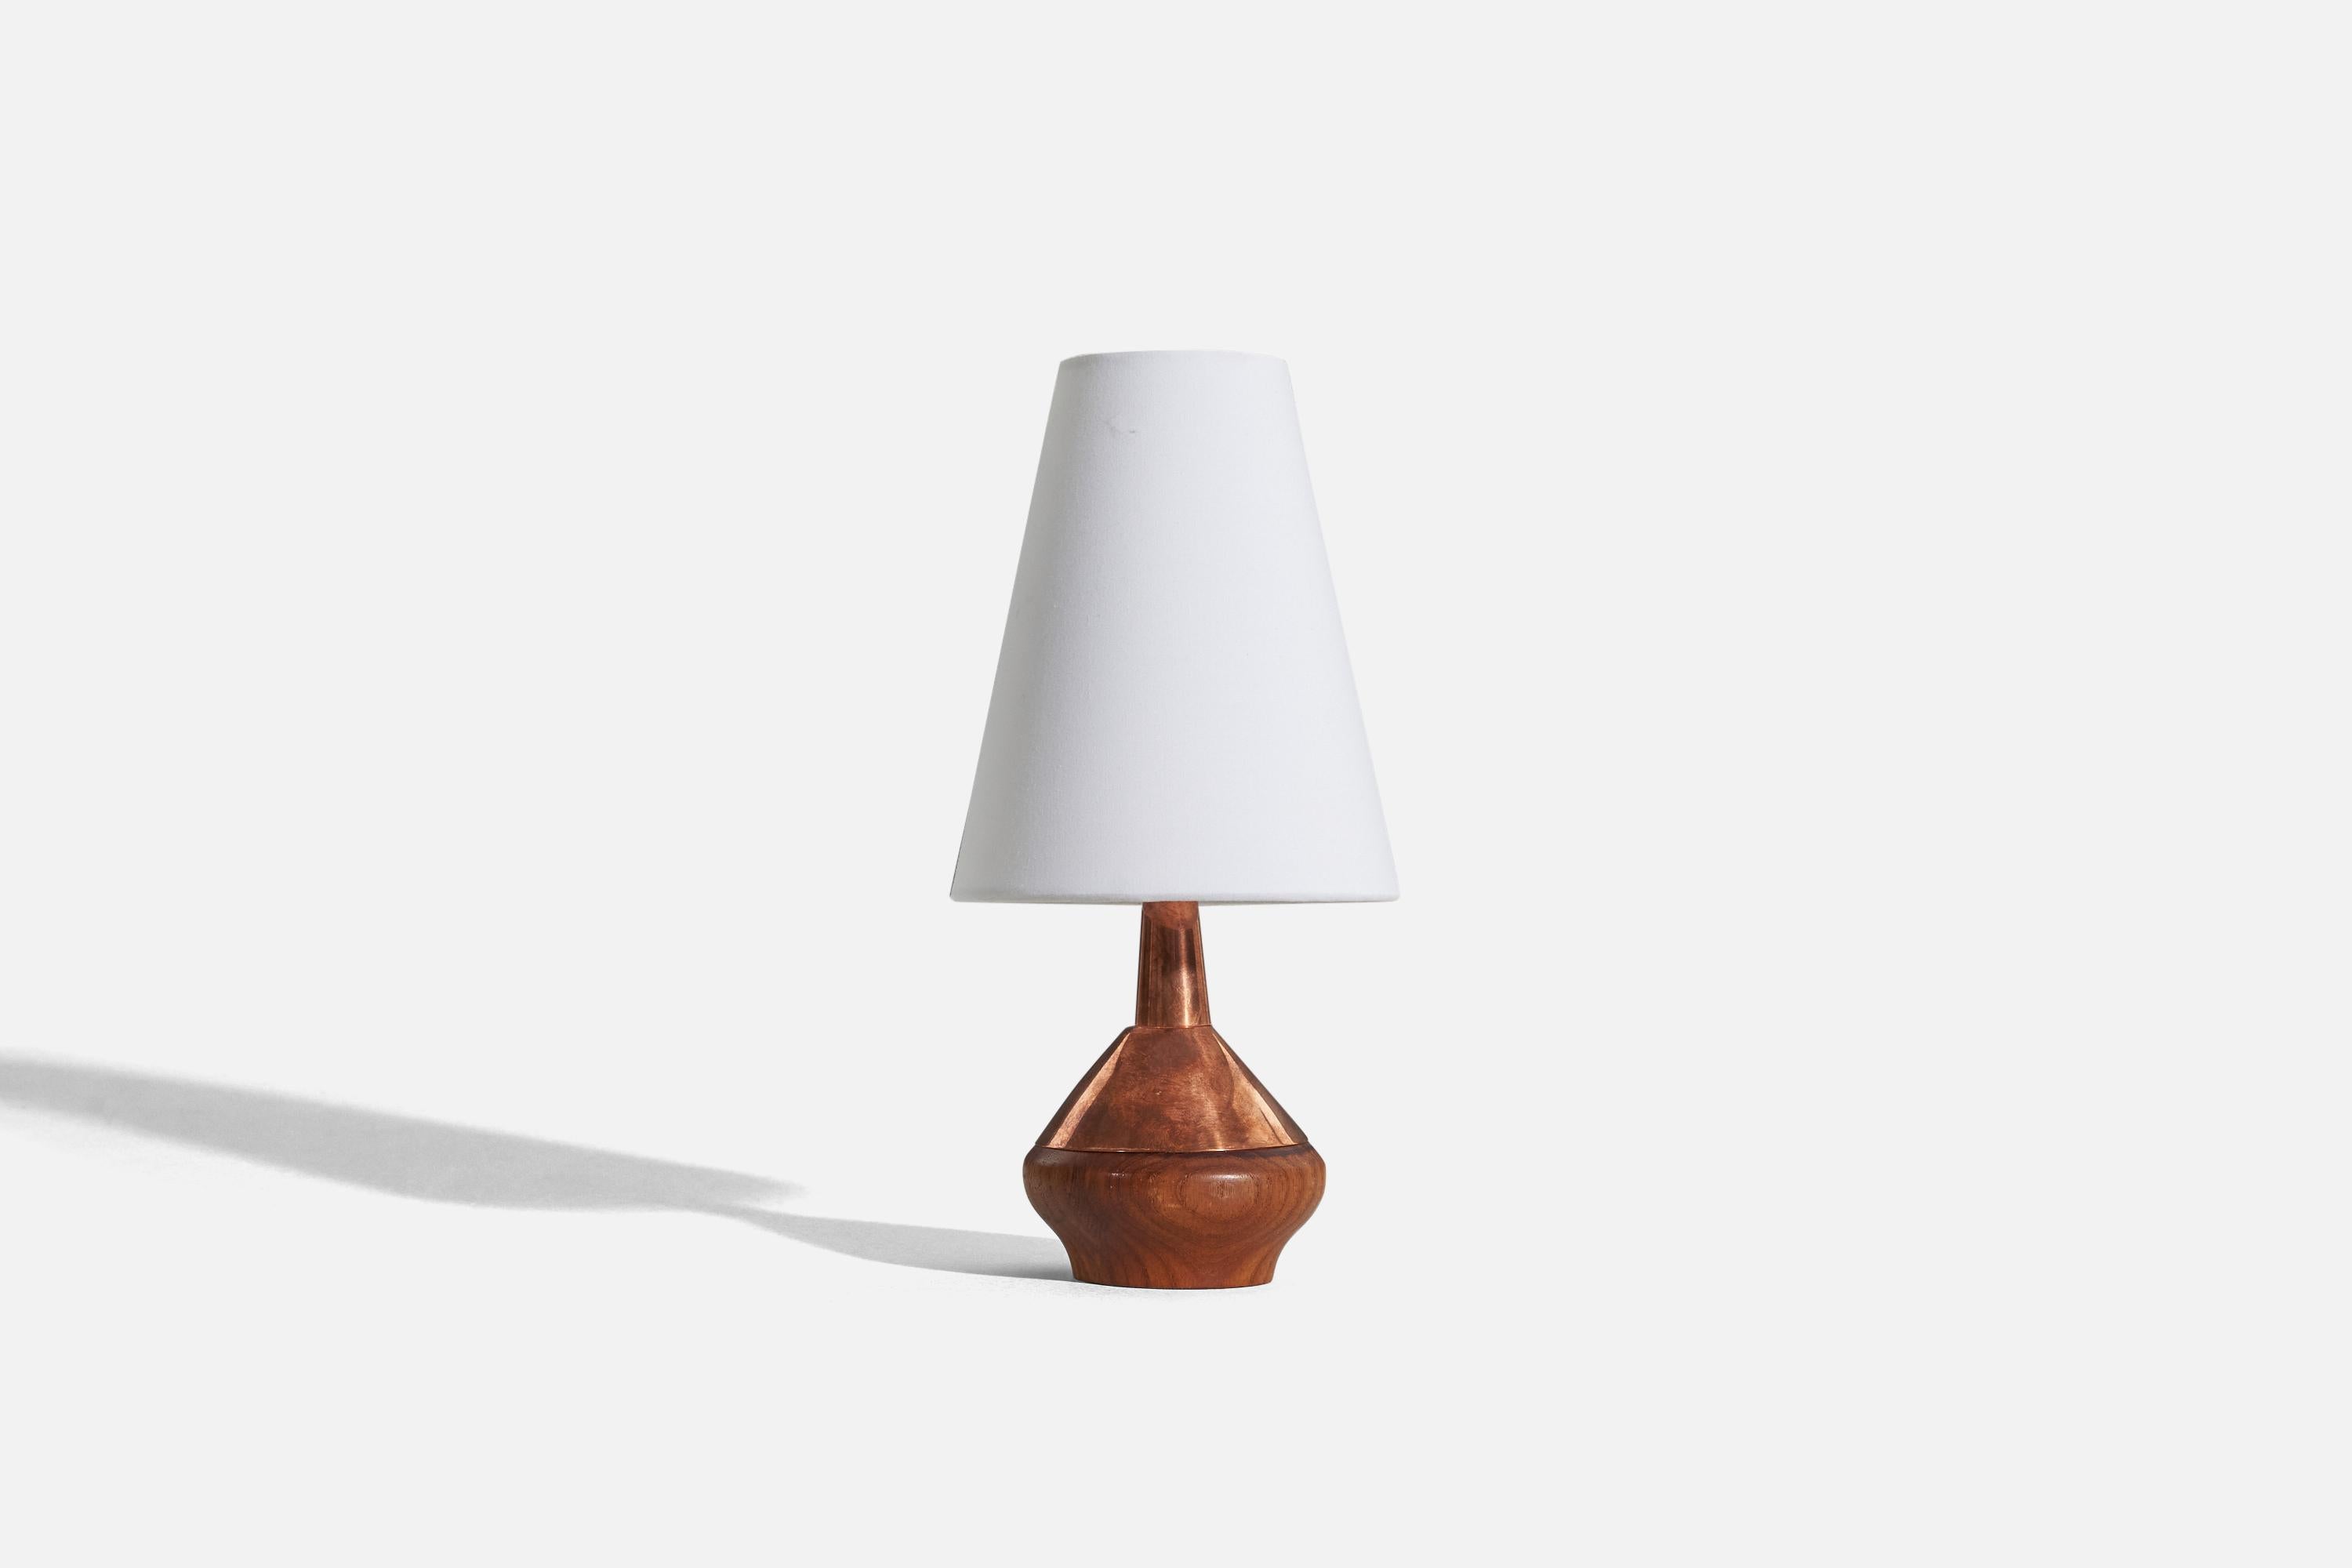 A copper and teak table lamp designed and produced by ASEA, Sweden, c. 1950s.

Sold without lampshade. 
Dimensions of lamp (inches) : 7.5 x 3.6875 x 3.6875 (H x W x D)
Dimensions of shade (inches) : 2.875 x 5.5 x 6.75 (T x B x H)
Dimension of